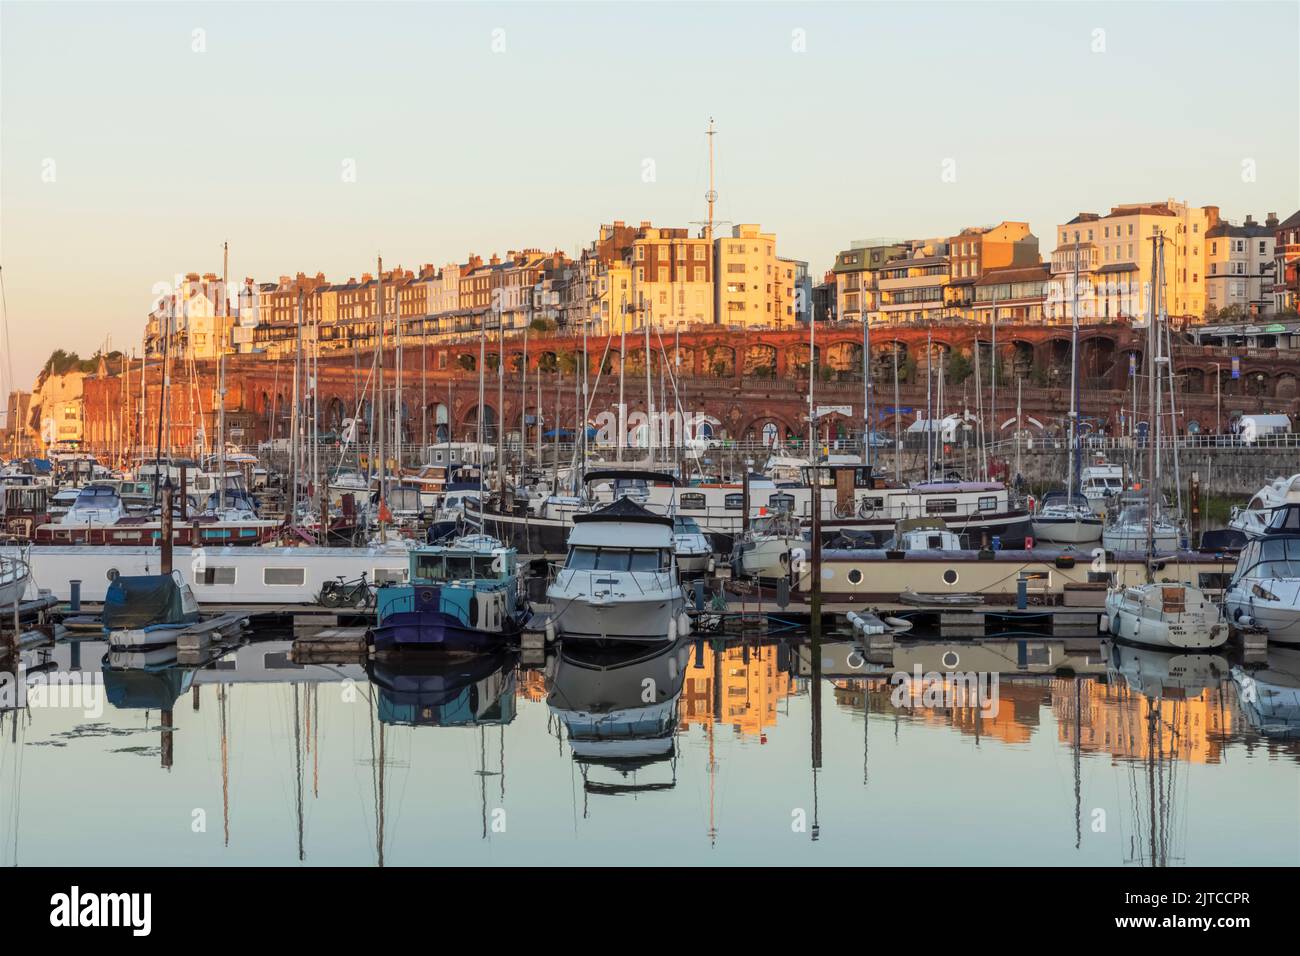 Angleterre, Kent, Ramsgate, Ramsgate Yacht Marina et Town Skyline Banque D'Images